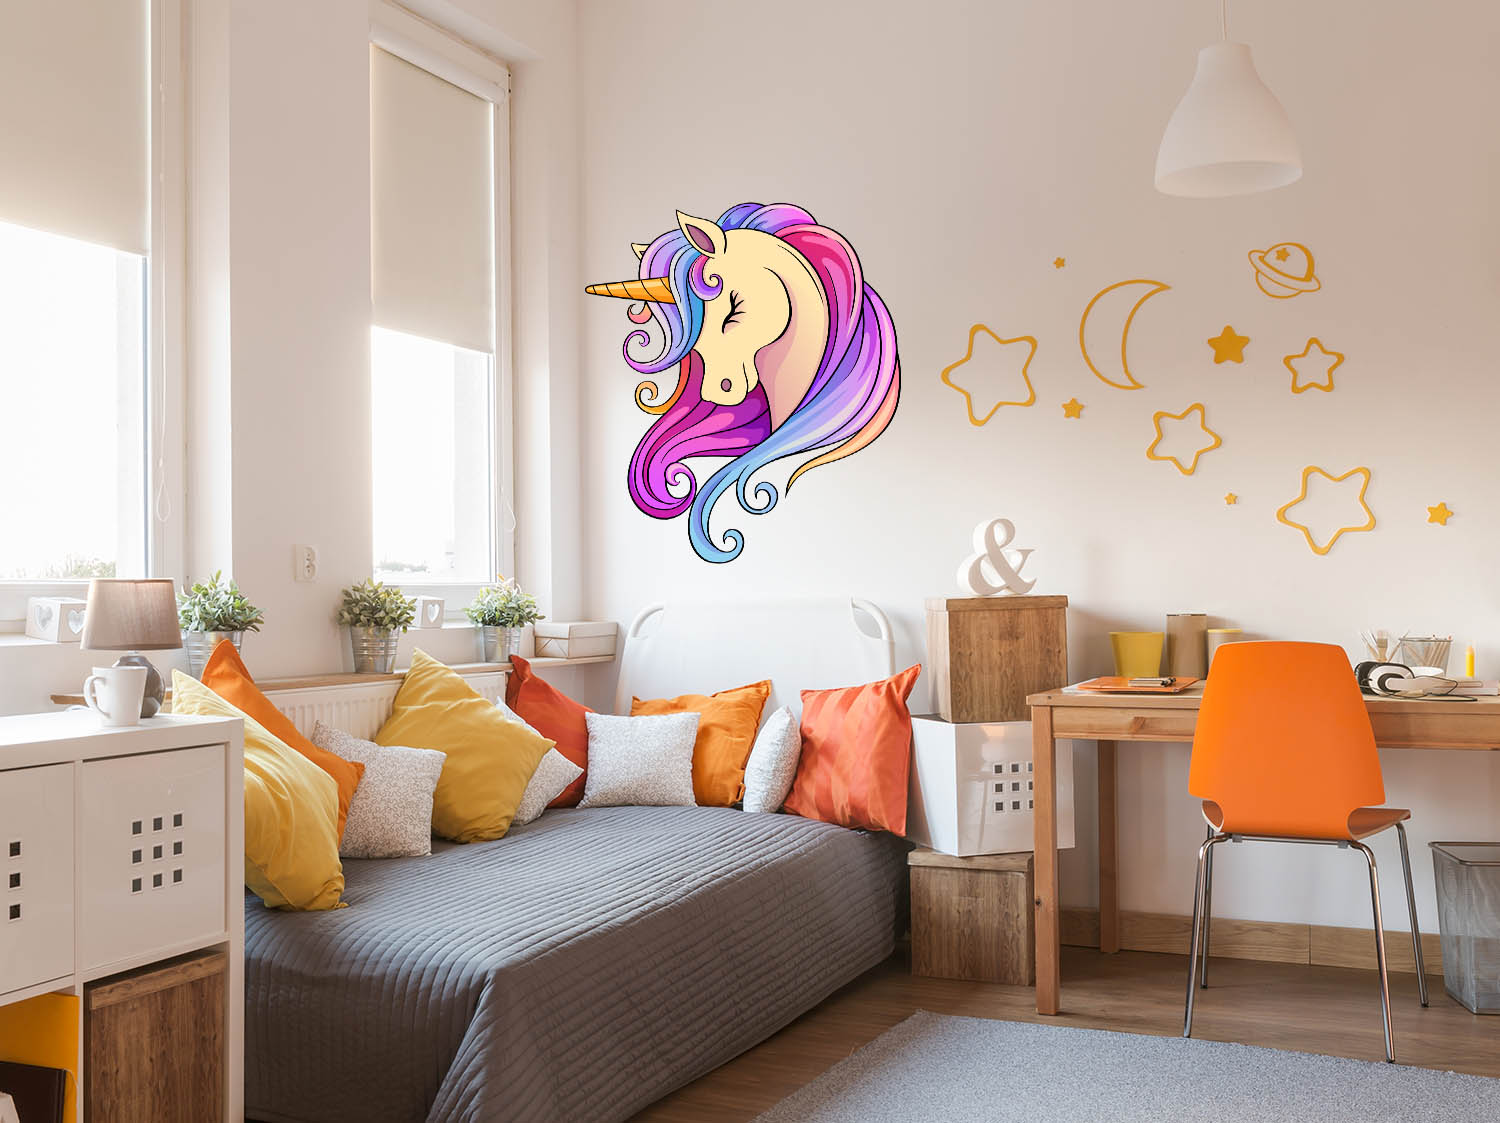 Adorable Multi Coloured Unicorn, Wall Decal Sticker, Removable with NO wall Damage!